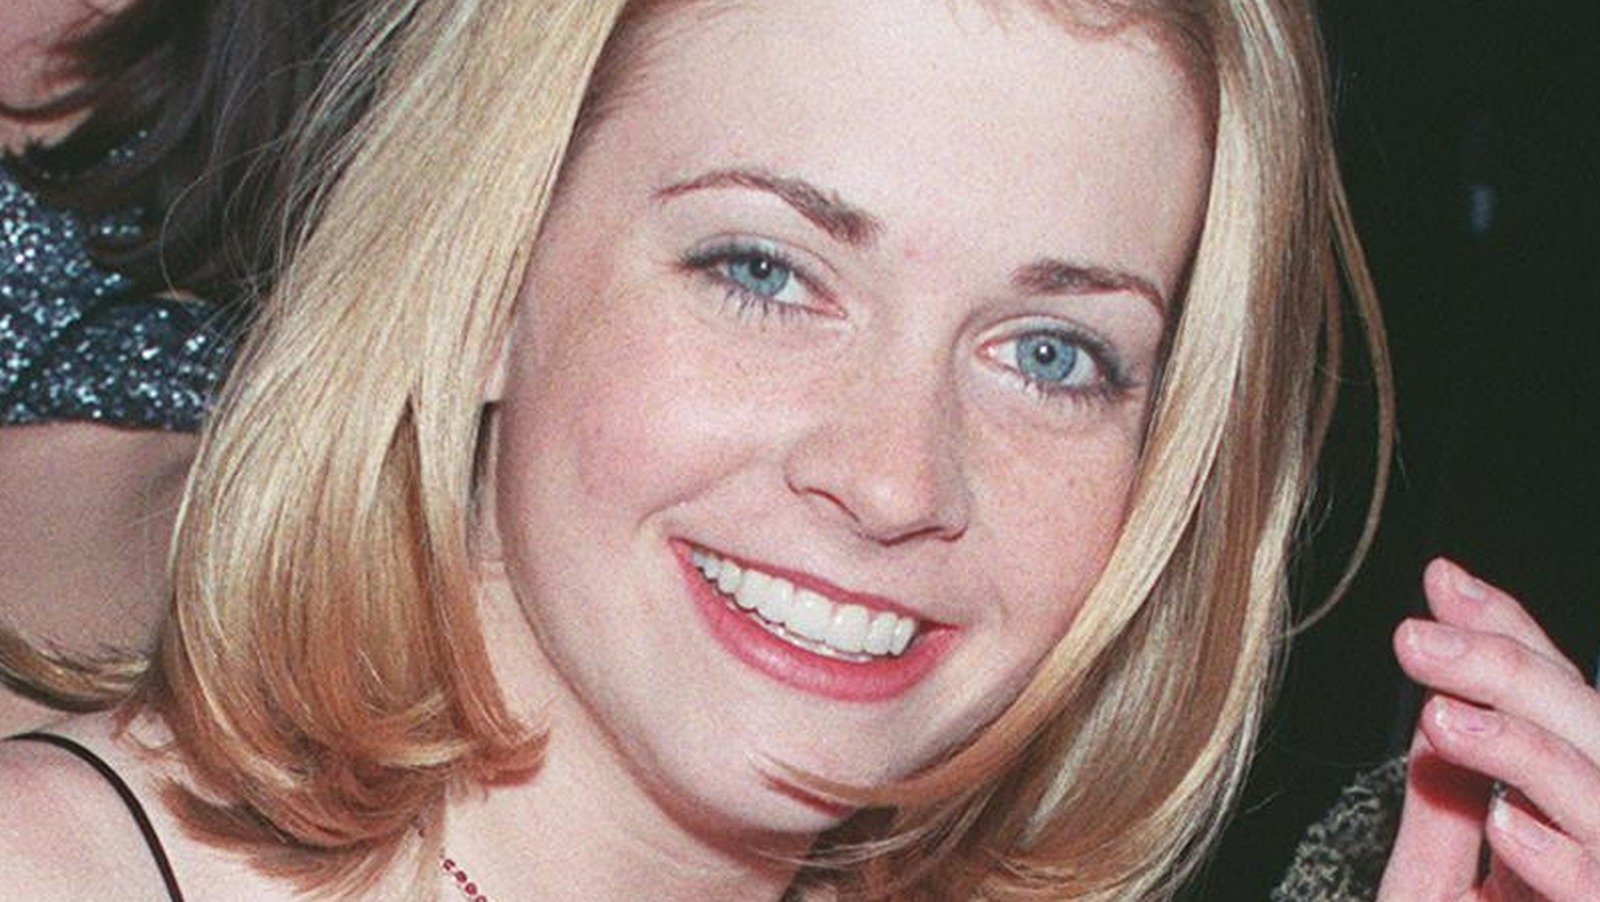 The Sabrina The Teenage Witch Star Who Now Works As A Janitor